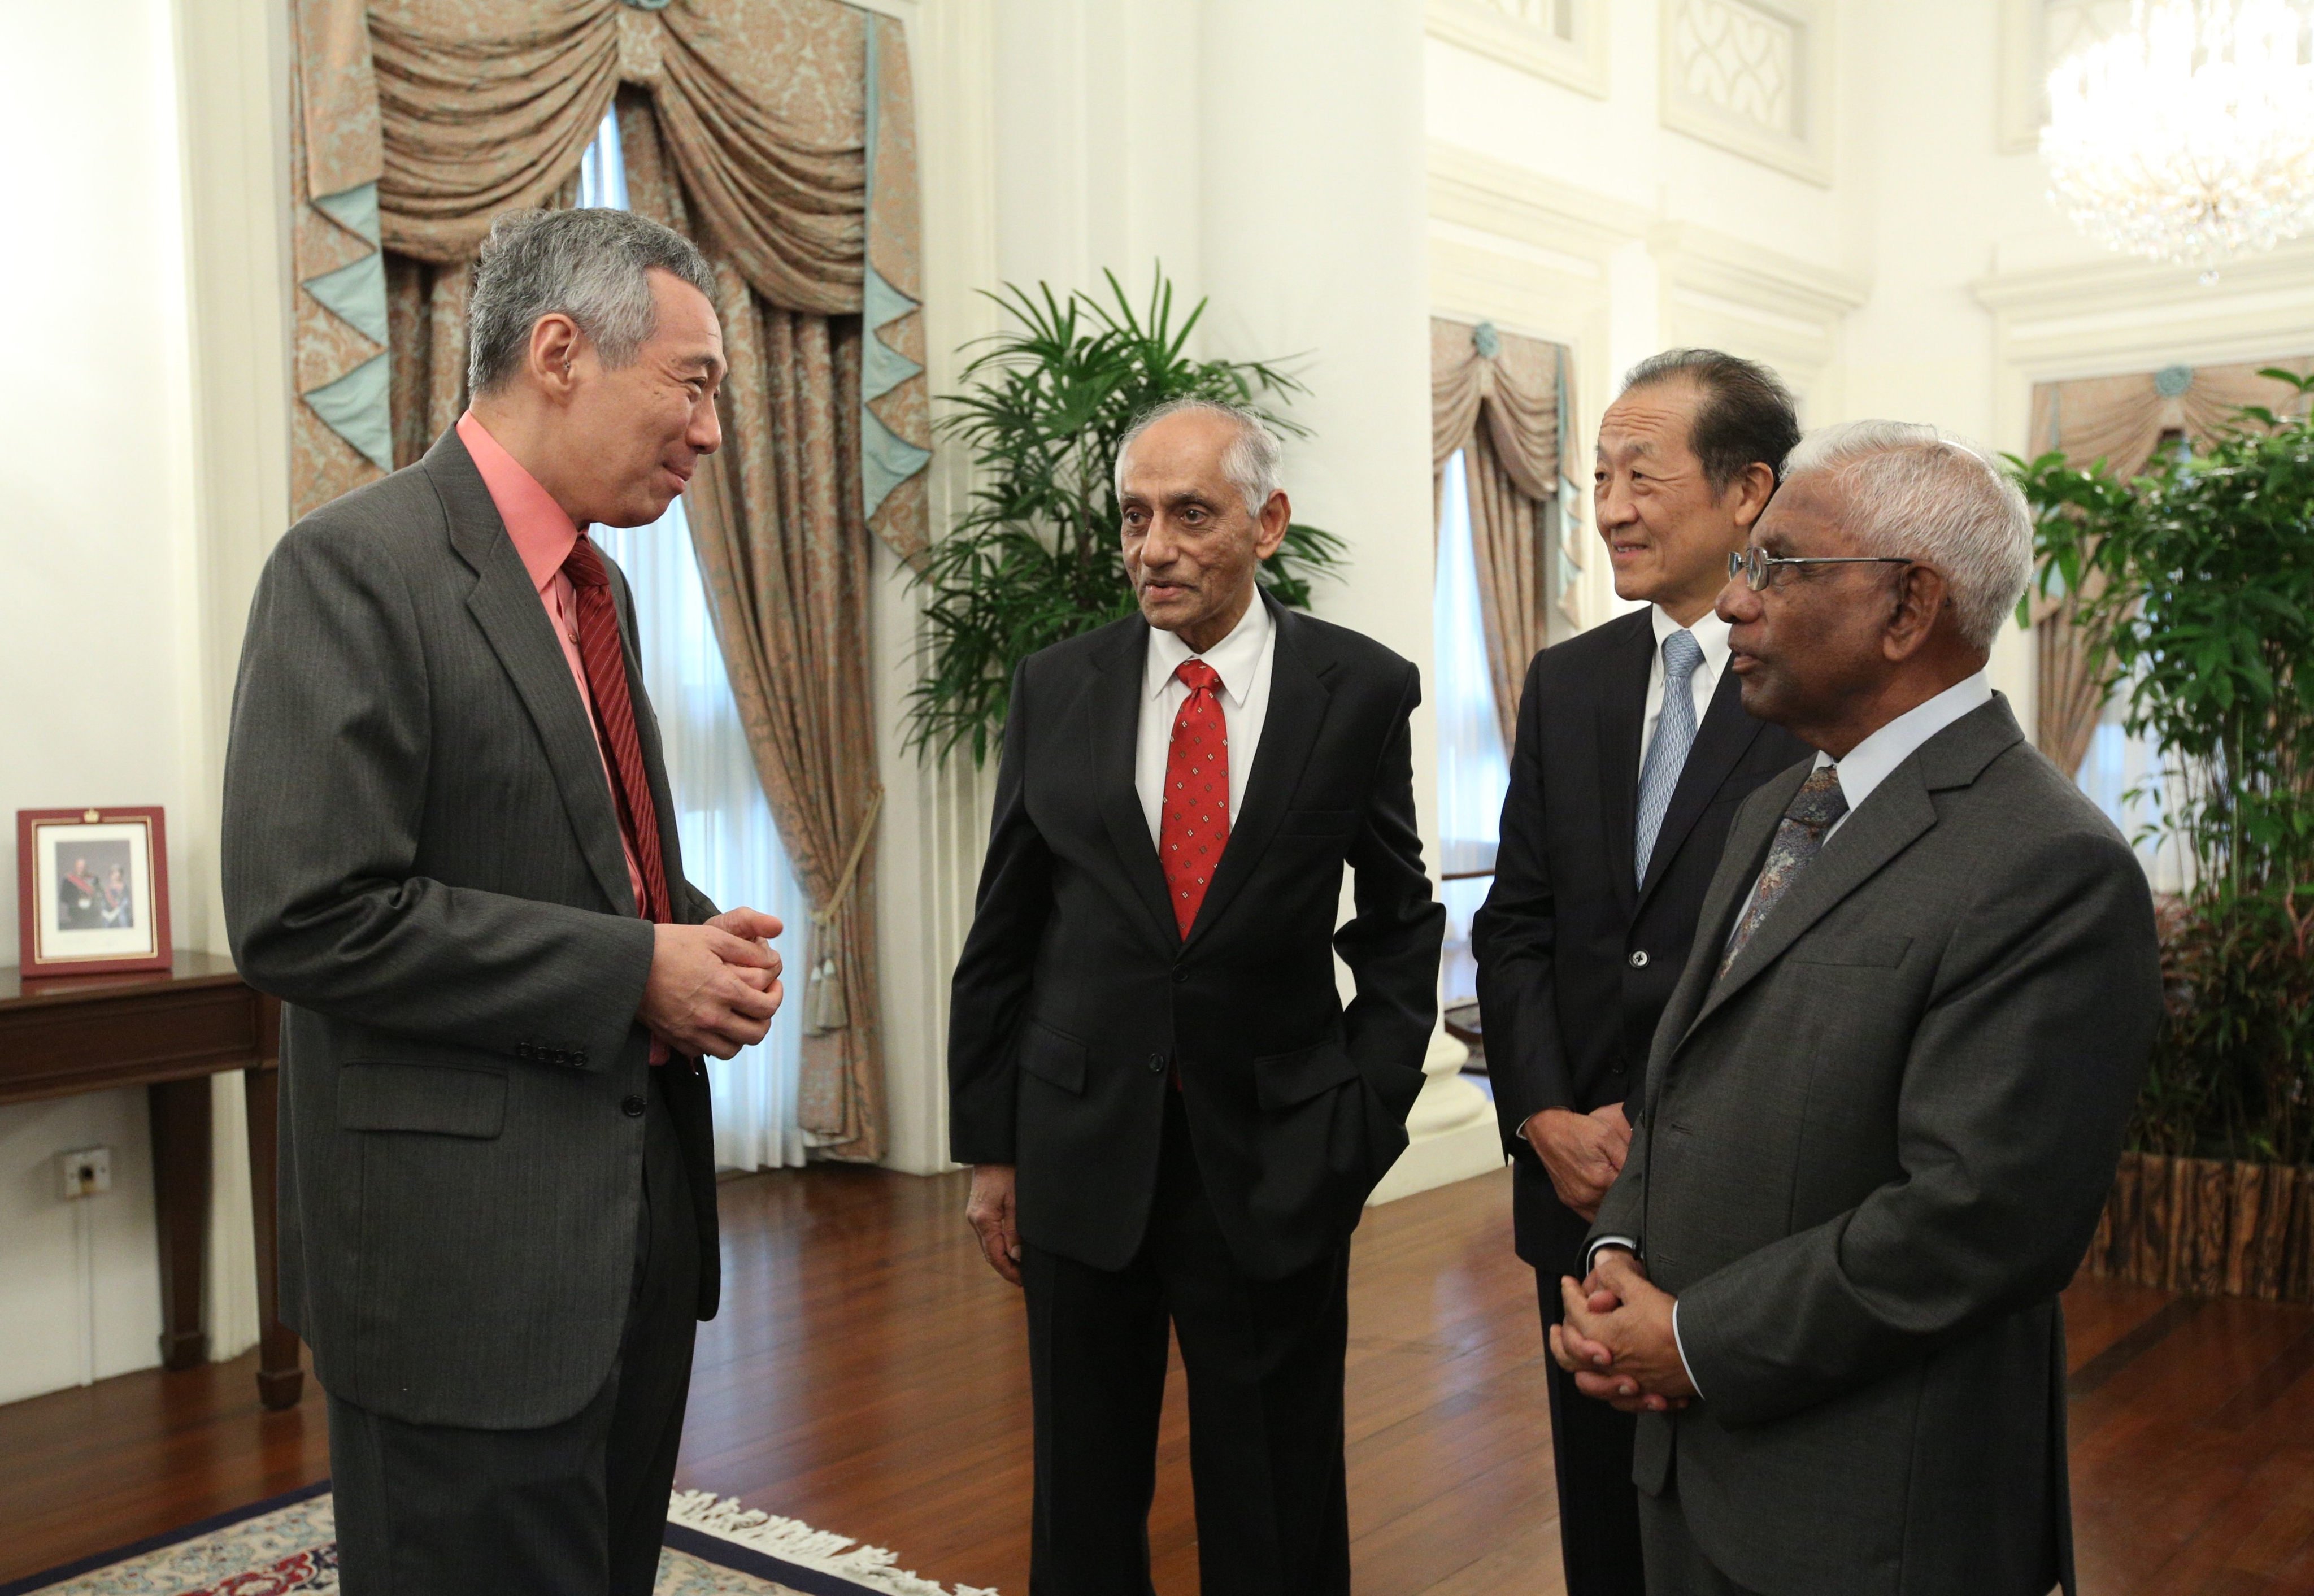 Mr J Y Pillay was sworn in as a member of the Presidential Council of Advisers (CPA) and re-appointed as Chairman of the CPA on 2 January 2015. Both re-appointments are for a further period of four years with effect from 2 January 2015. The appointment and swearing in ceremony, which was conducted in the Istana, was attended by Prime Minister Lee Hsien Loong and members of the CPA. Photo: Prime Minister’s Office Singapore